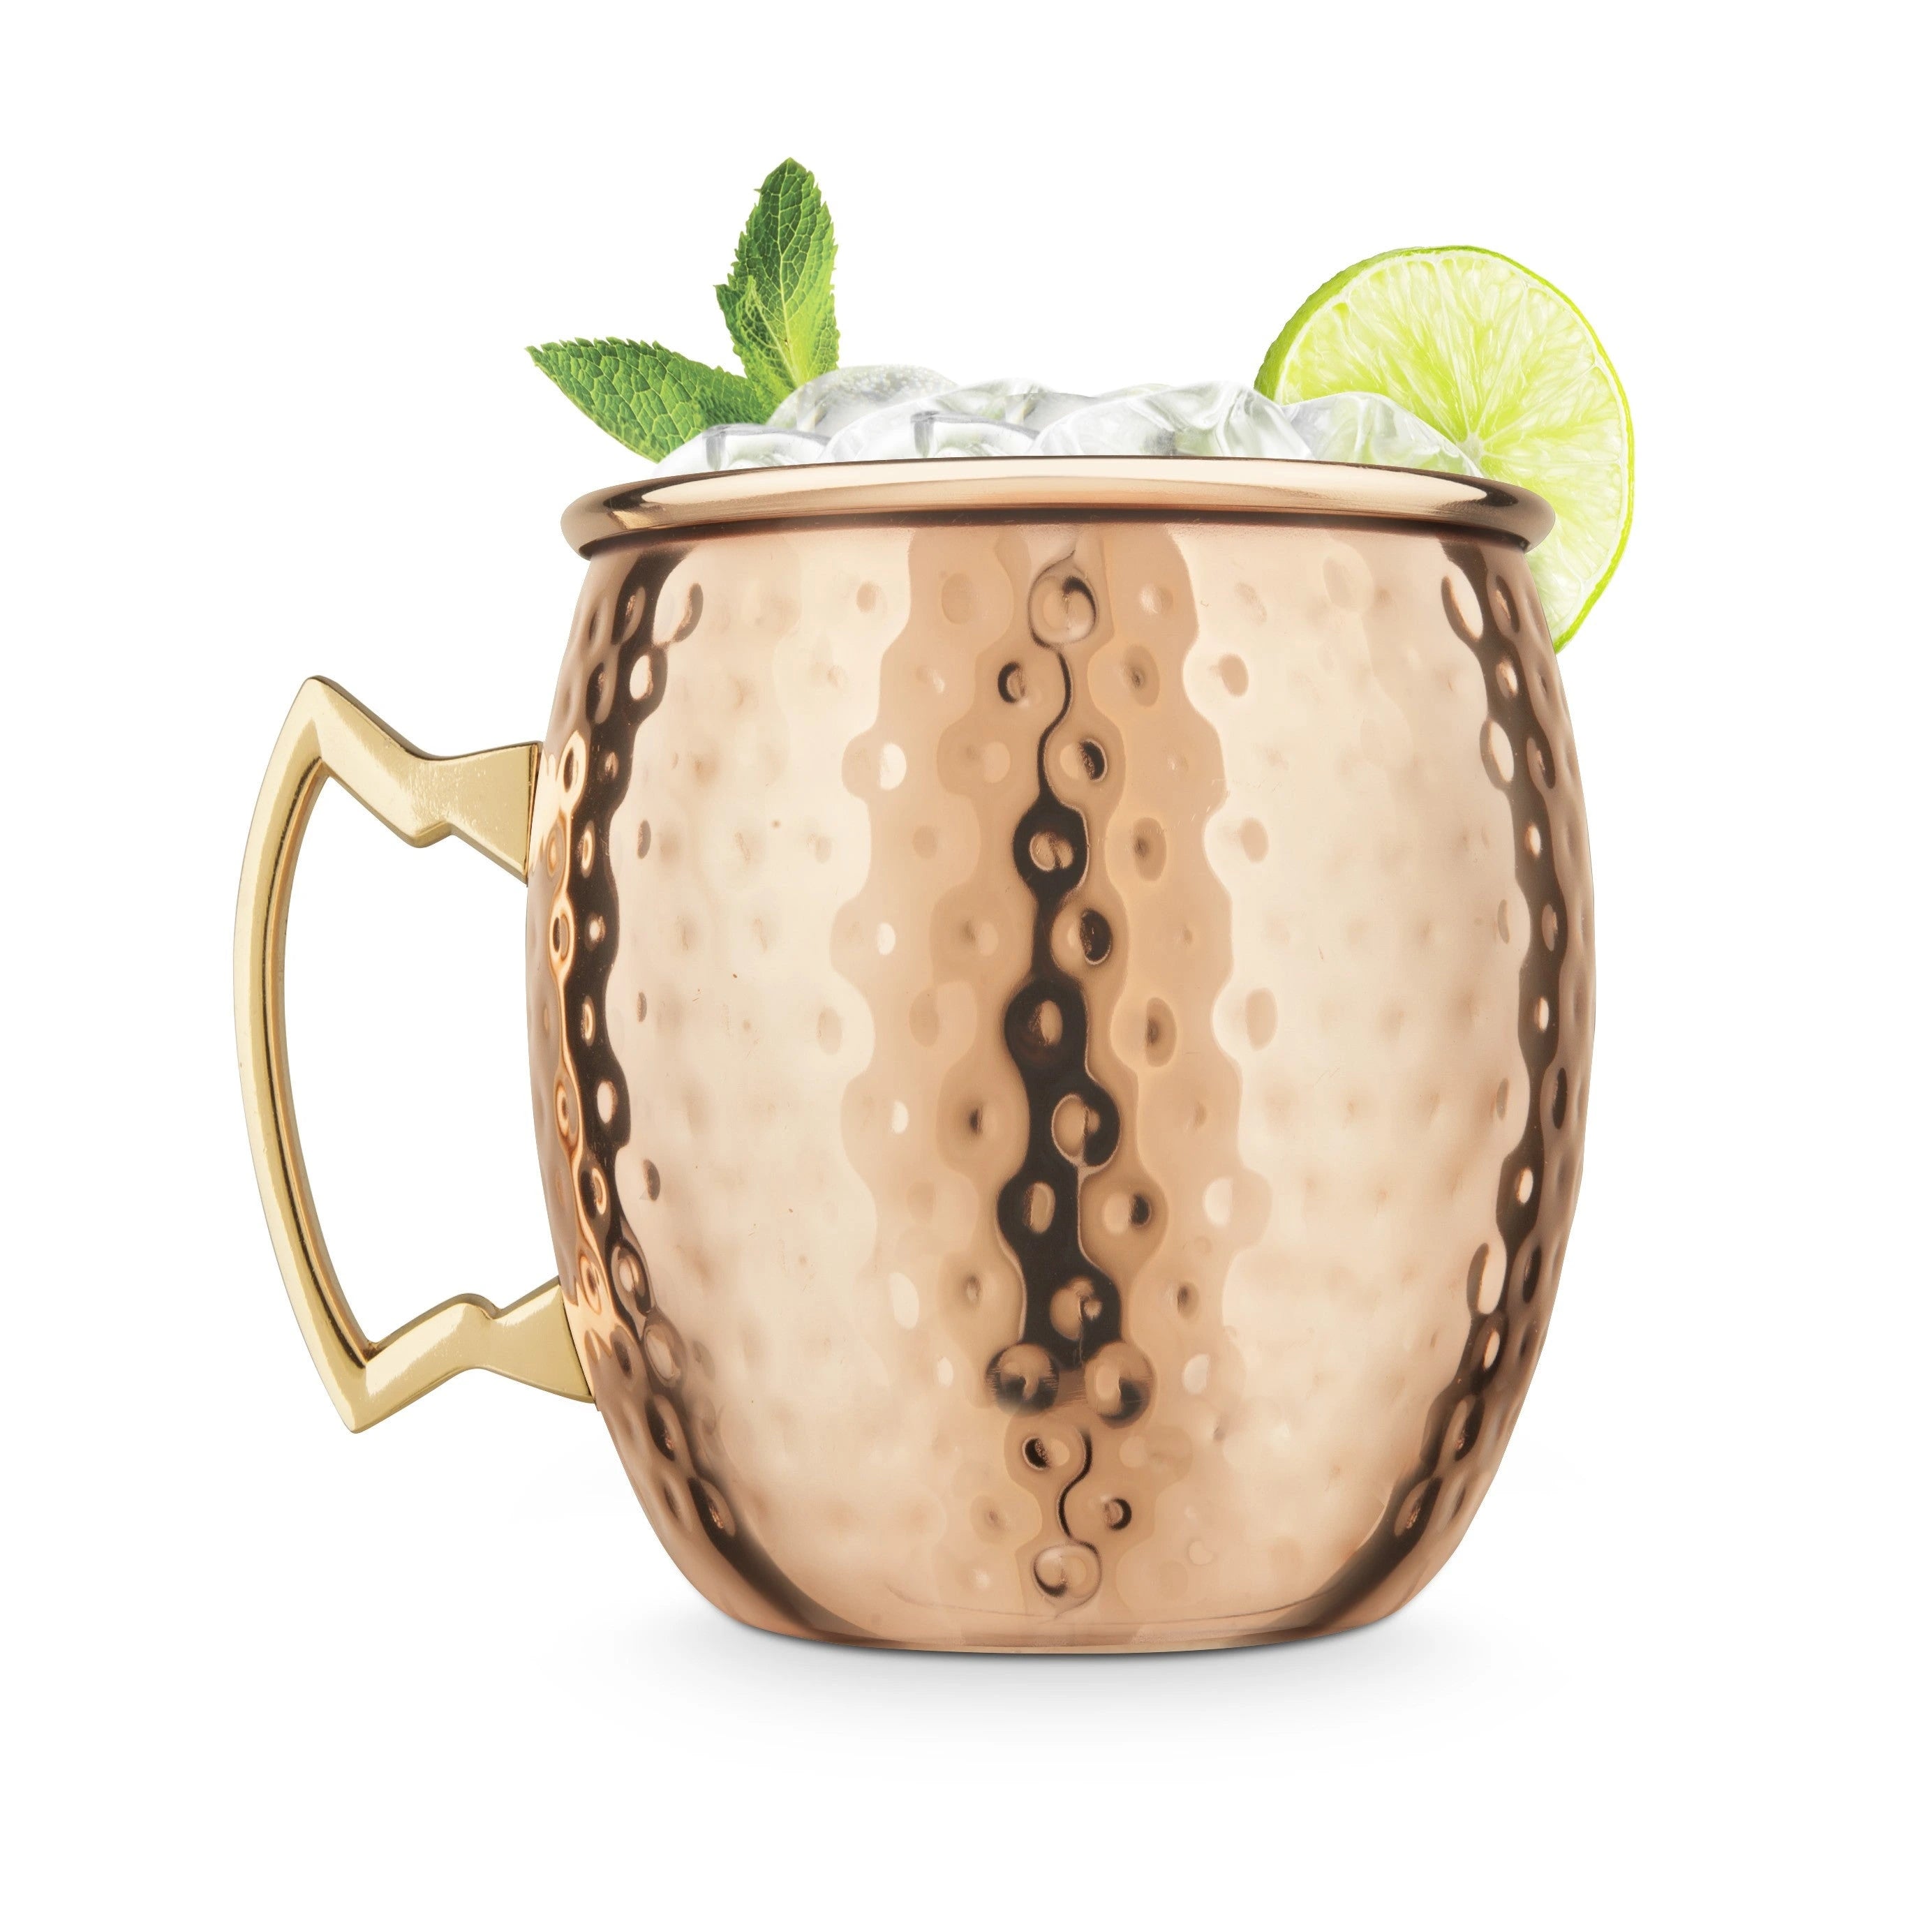 FINAL TOUCH MOSCOW MULE HAMMERED FINISH